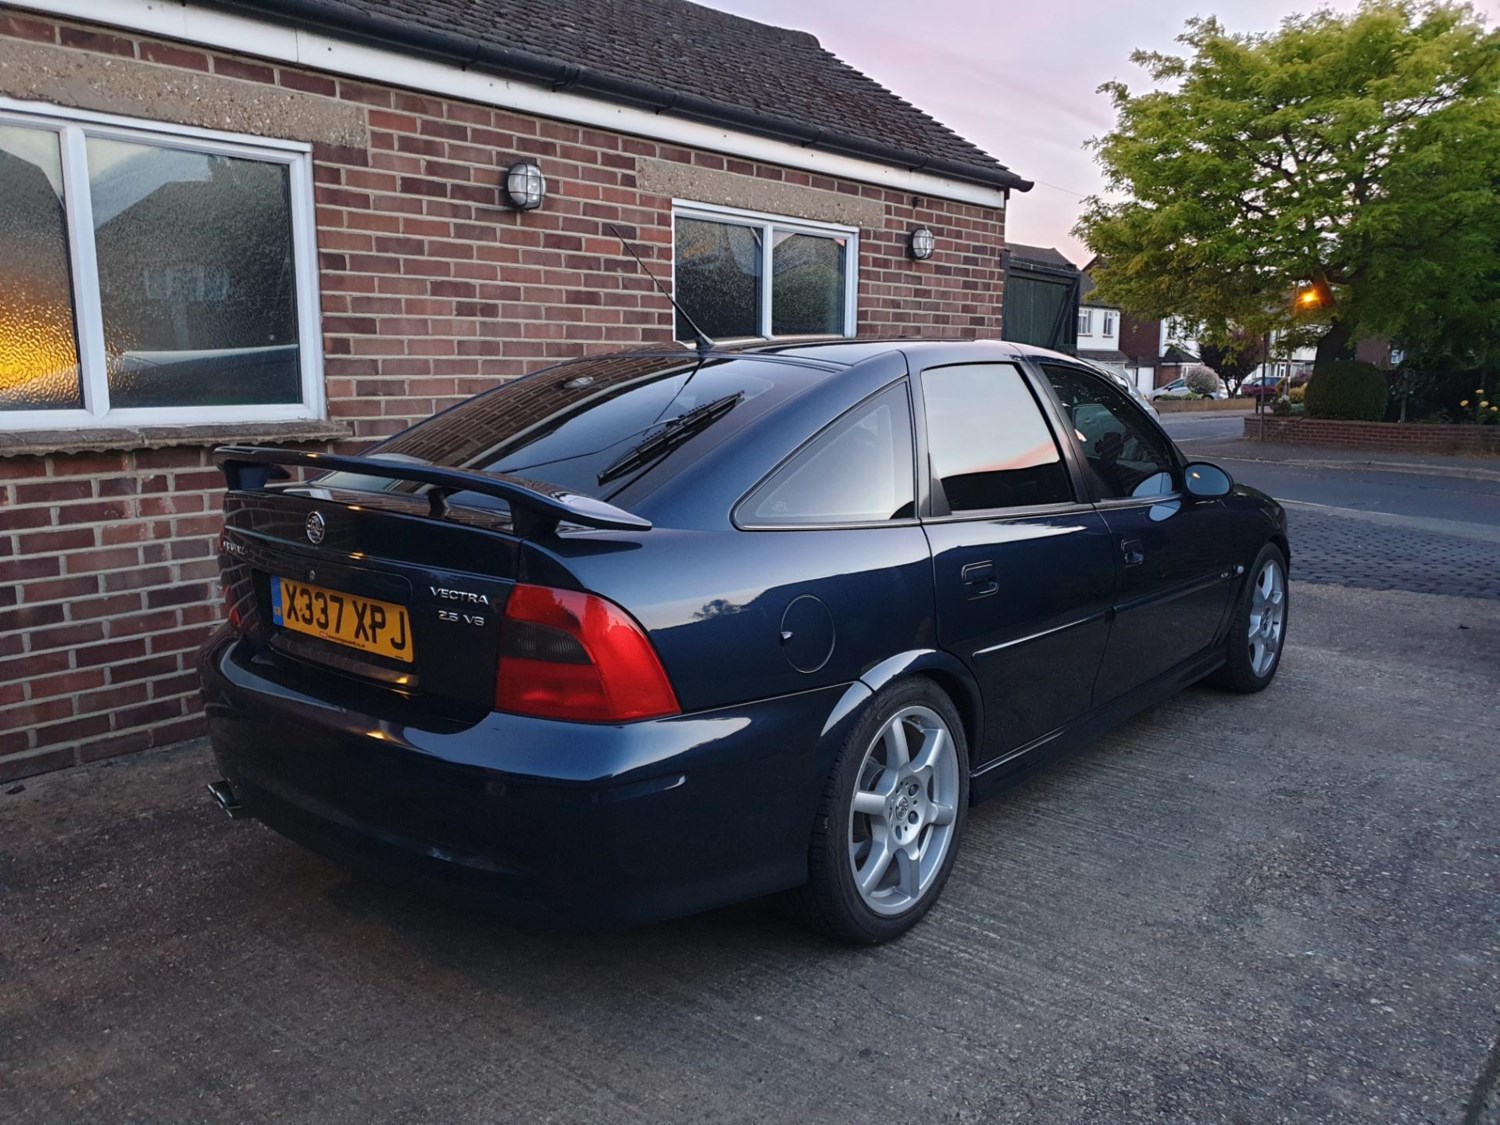 2000-vauxhall-vectra-gsi-for-sale-ccfs